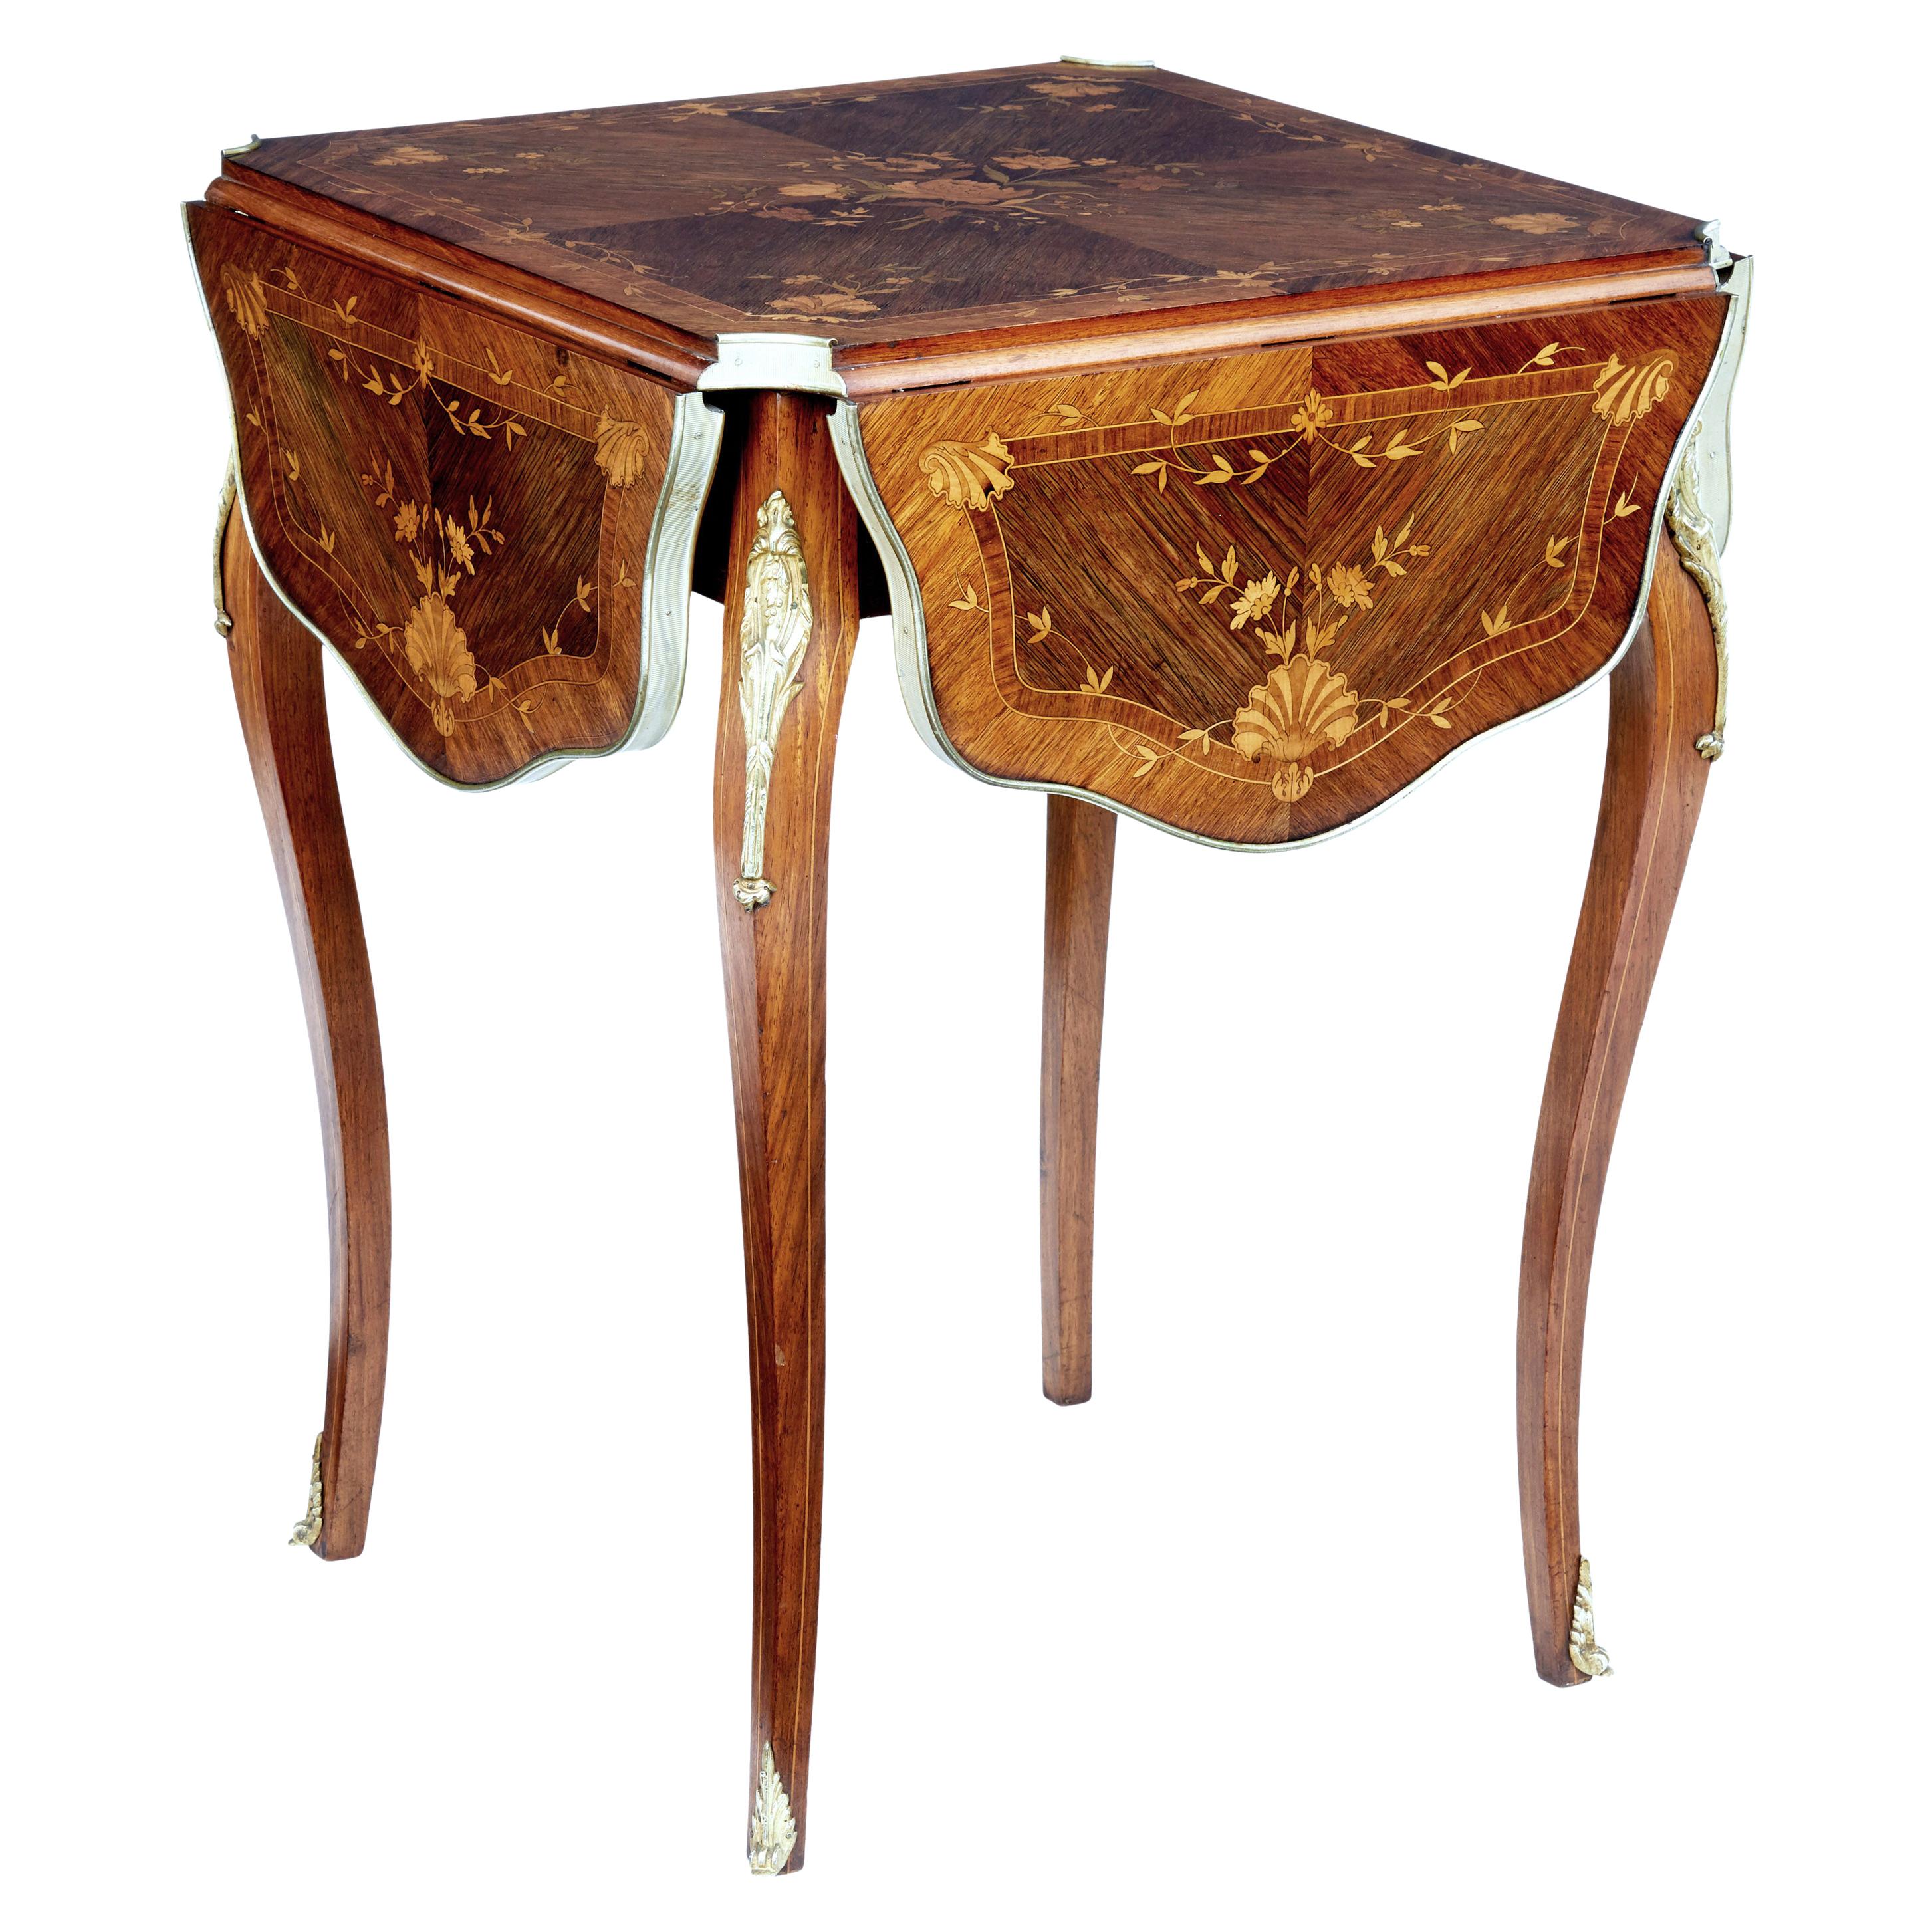 19th Century Walnut Inlaid Envelope Drop-Leaf Occasional Table